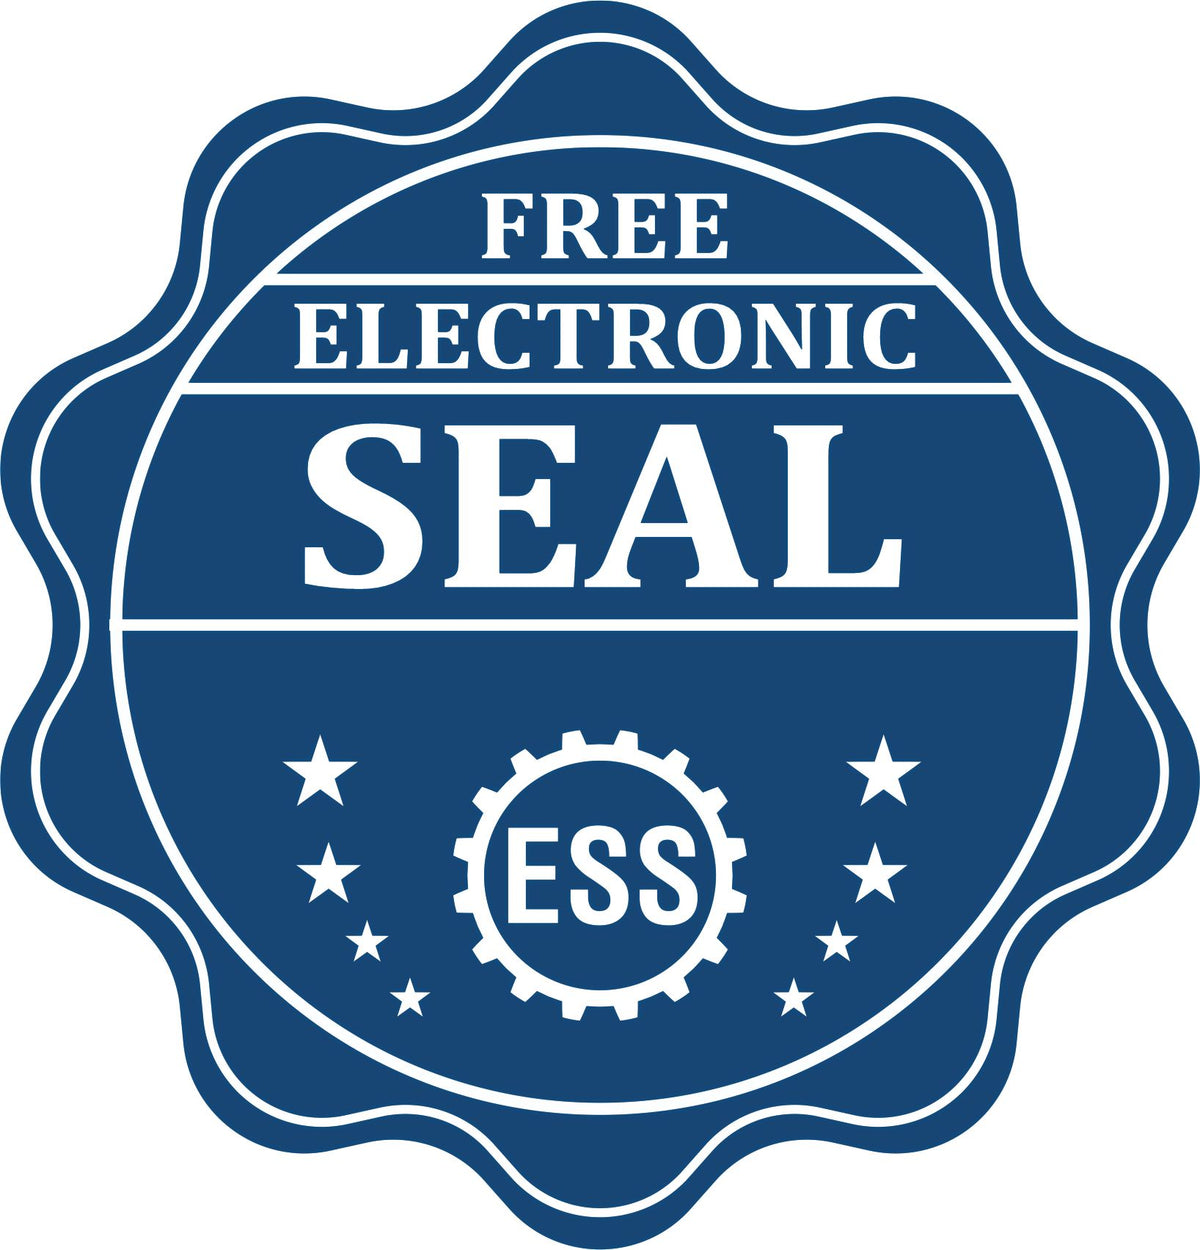 A badge showing a free electronic seal for the Premium MaxLight Pre-Inked Maine Engineering Stamp with stars and the ESS gear on the emblem.